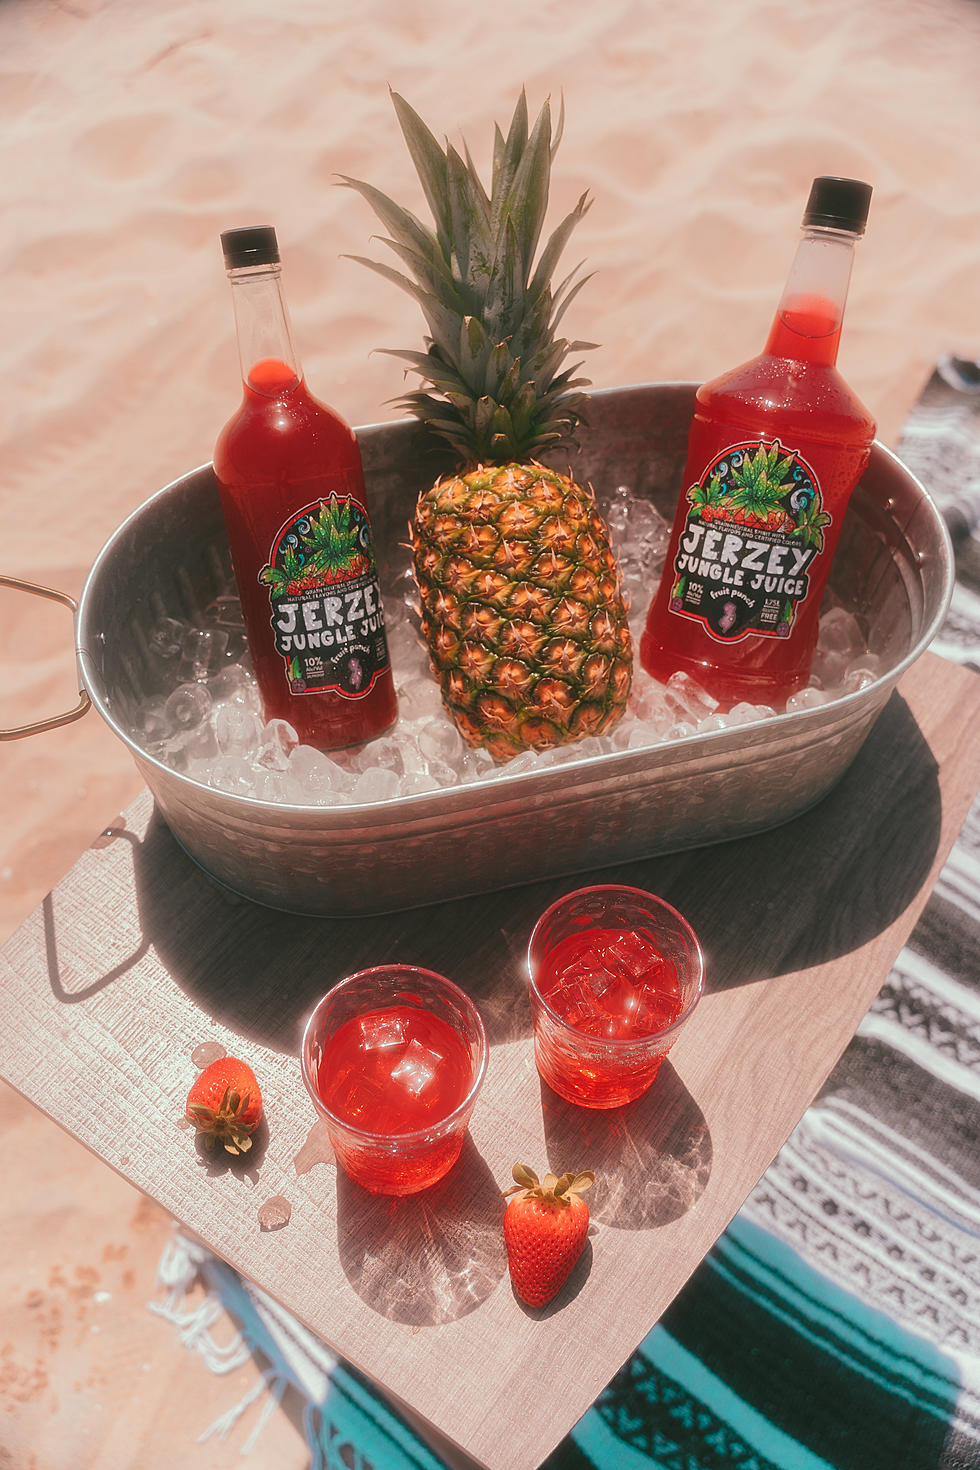 Ready To Party? Jersey Shore, NJ Bars Now Selling First-Ever, Pour & Drink Jungle Juice